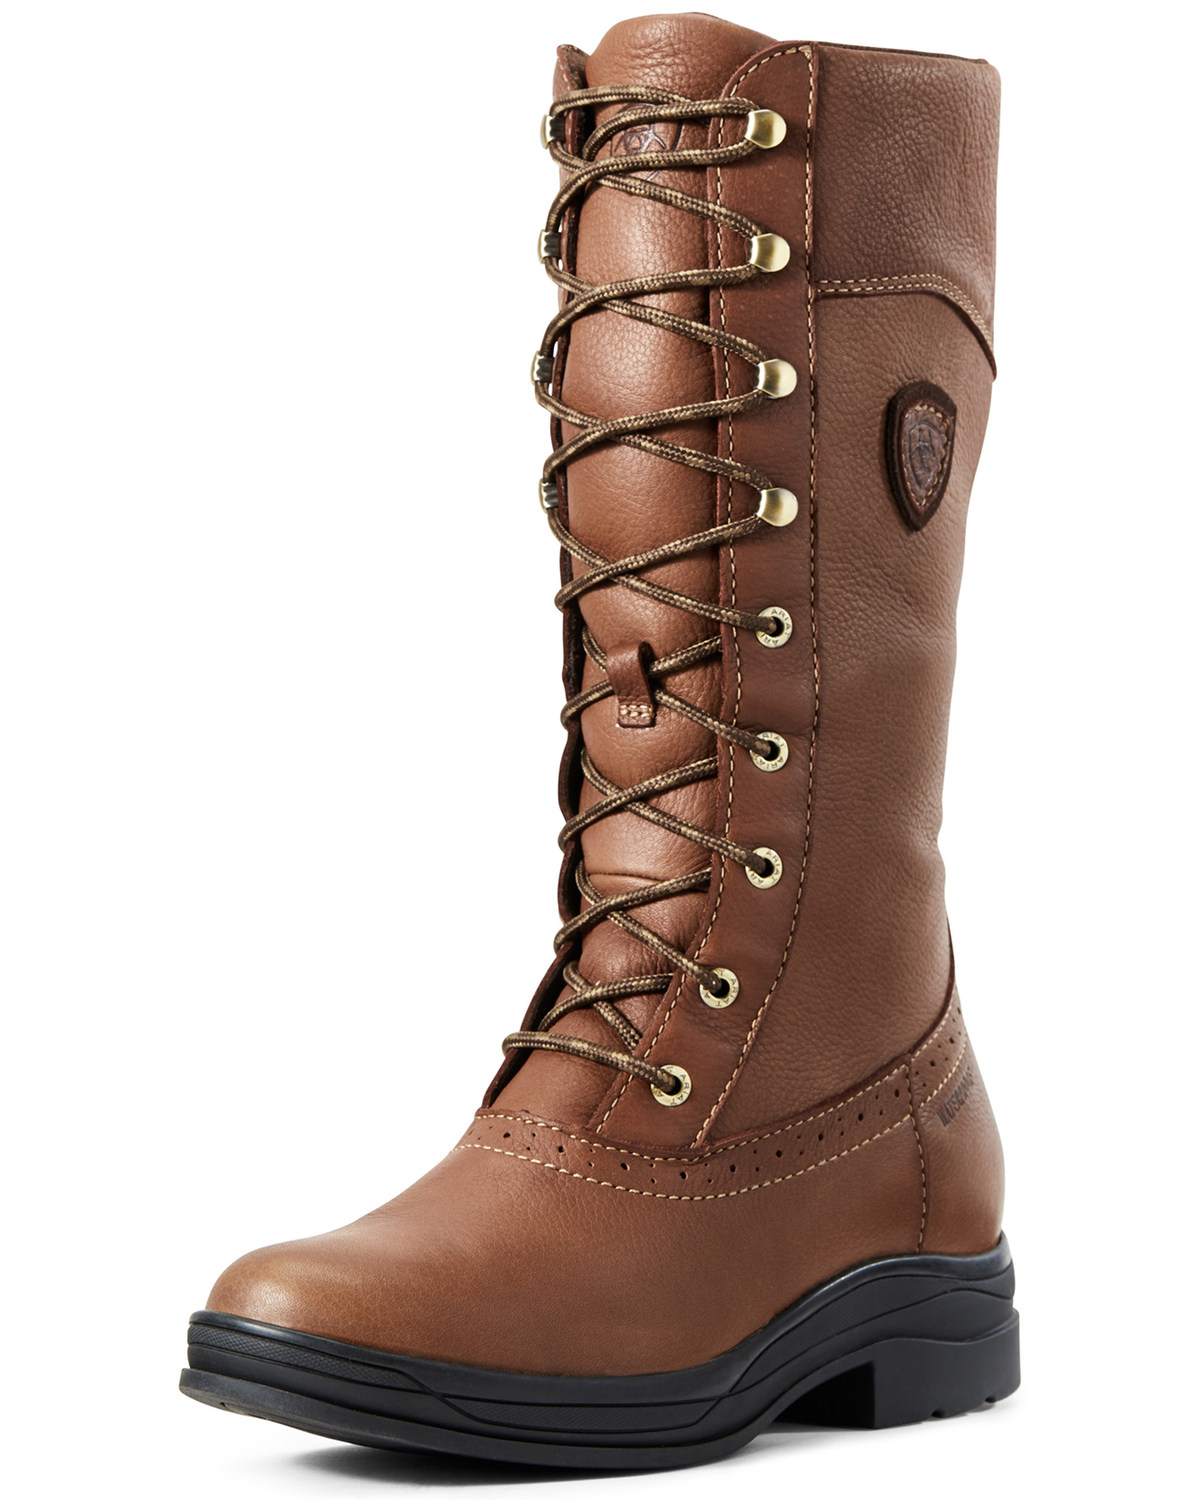 women's lace up ariat boots